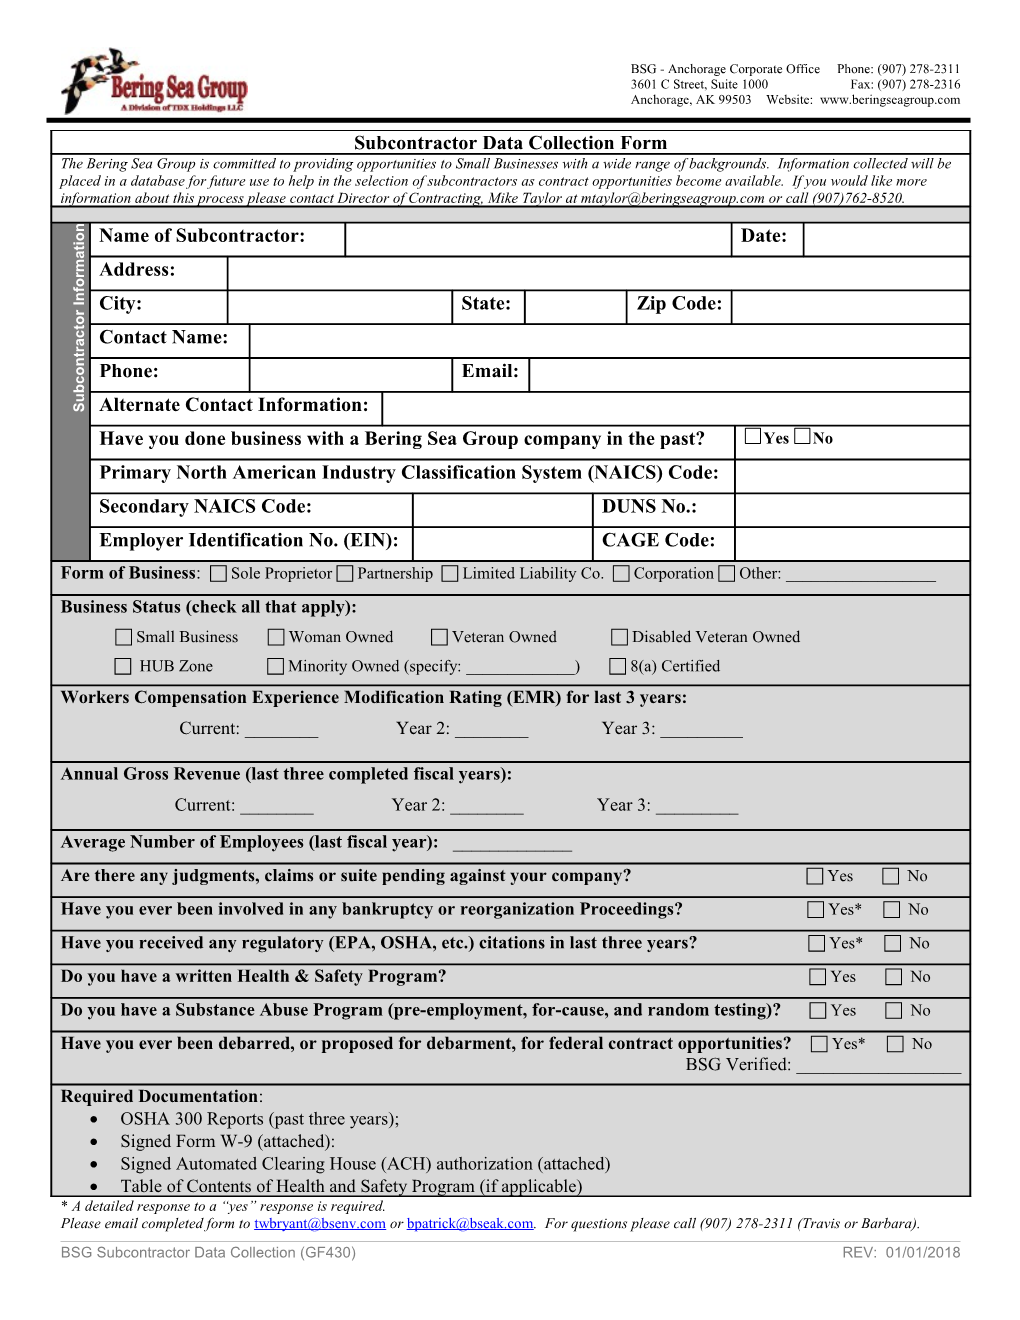 Subcontractor Data Collection Form